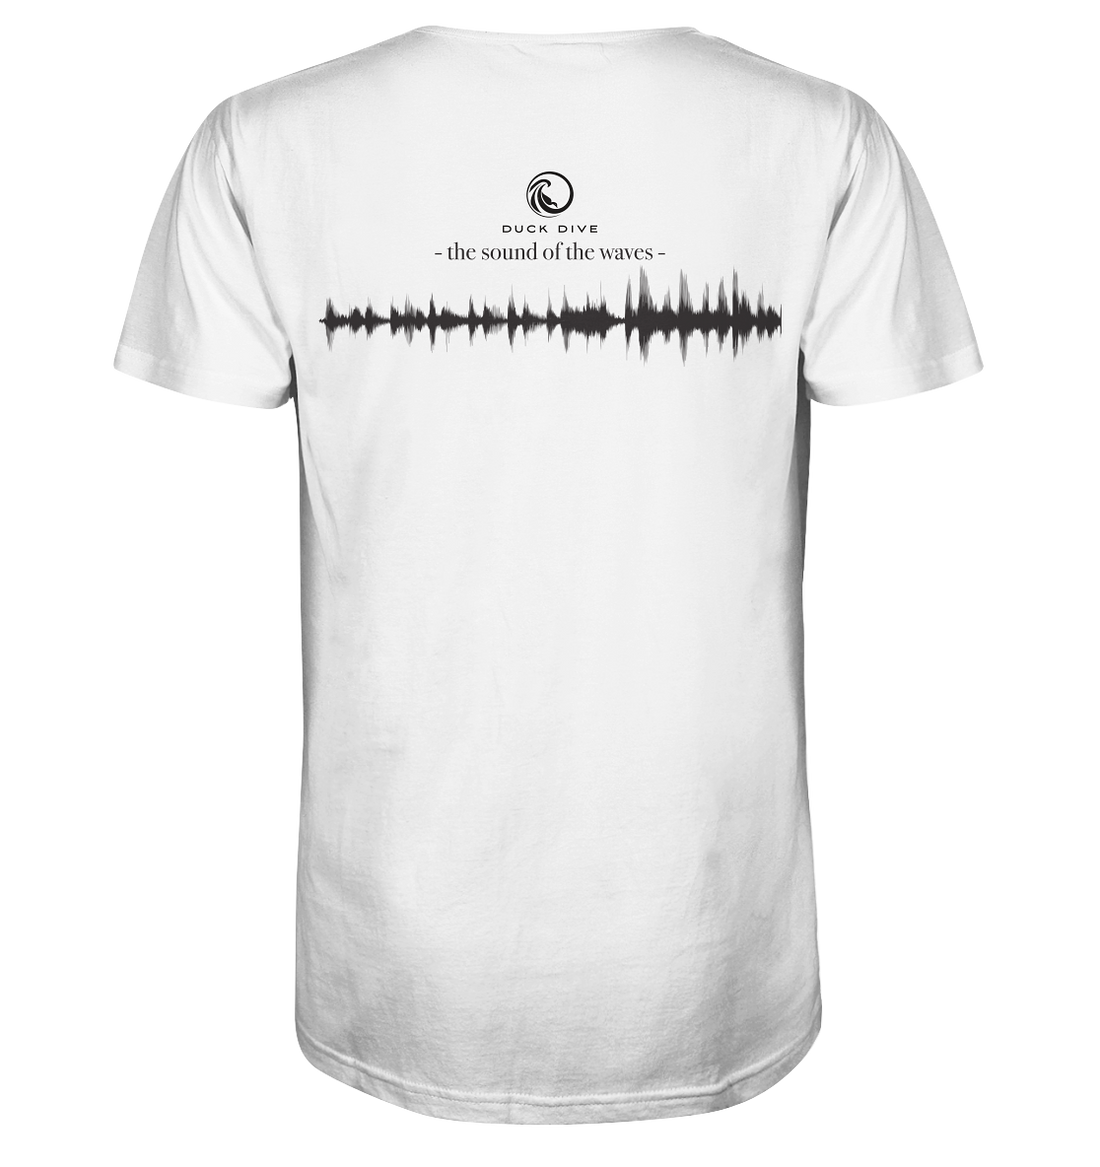 Sound of the Waves - Organic Shirt - Duck Dive Clothing